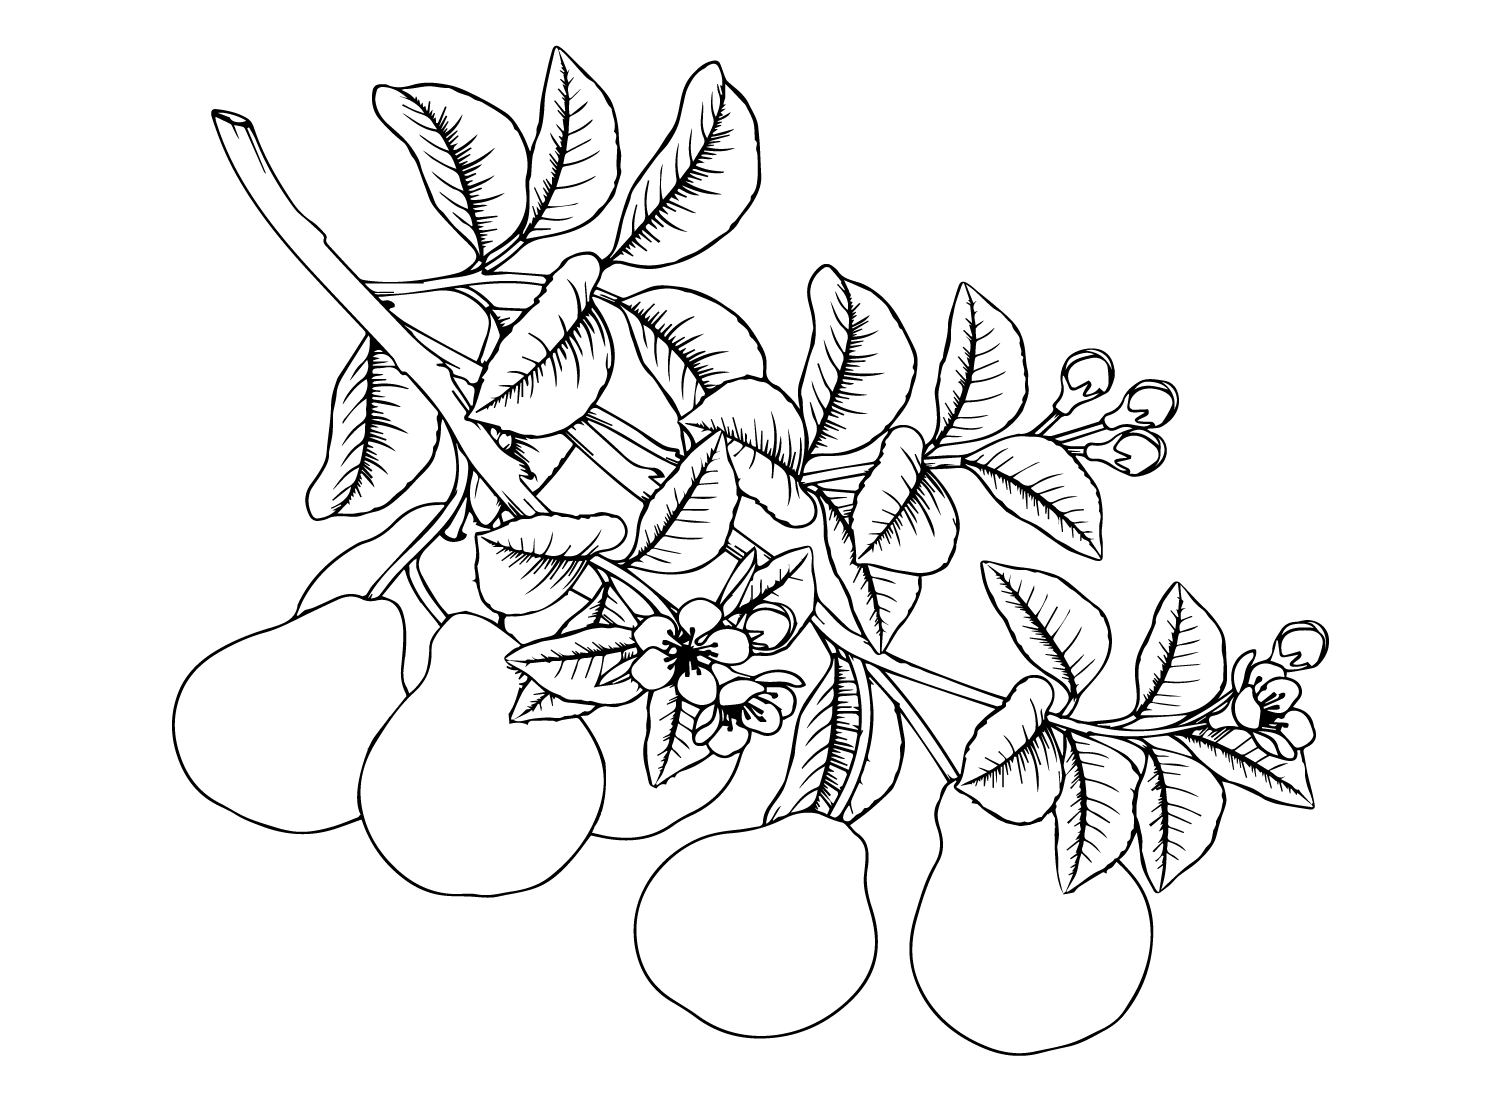 Pears Branch Coloring Page